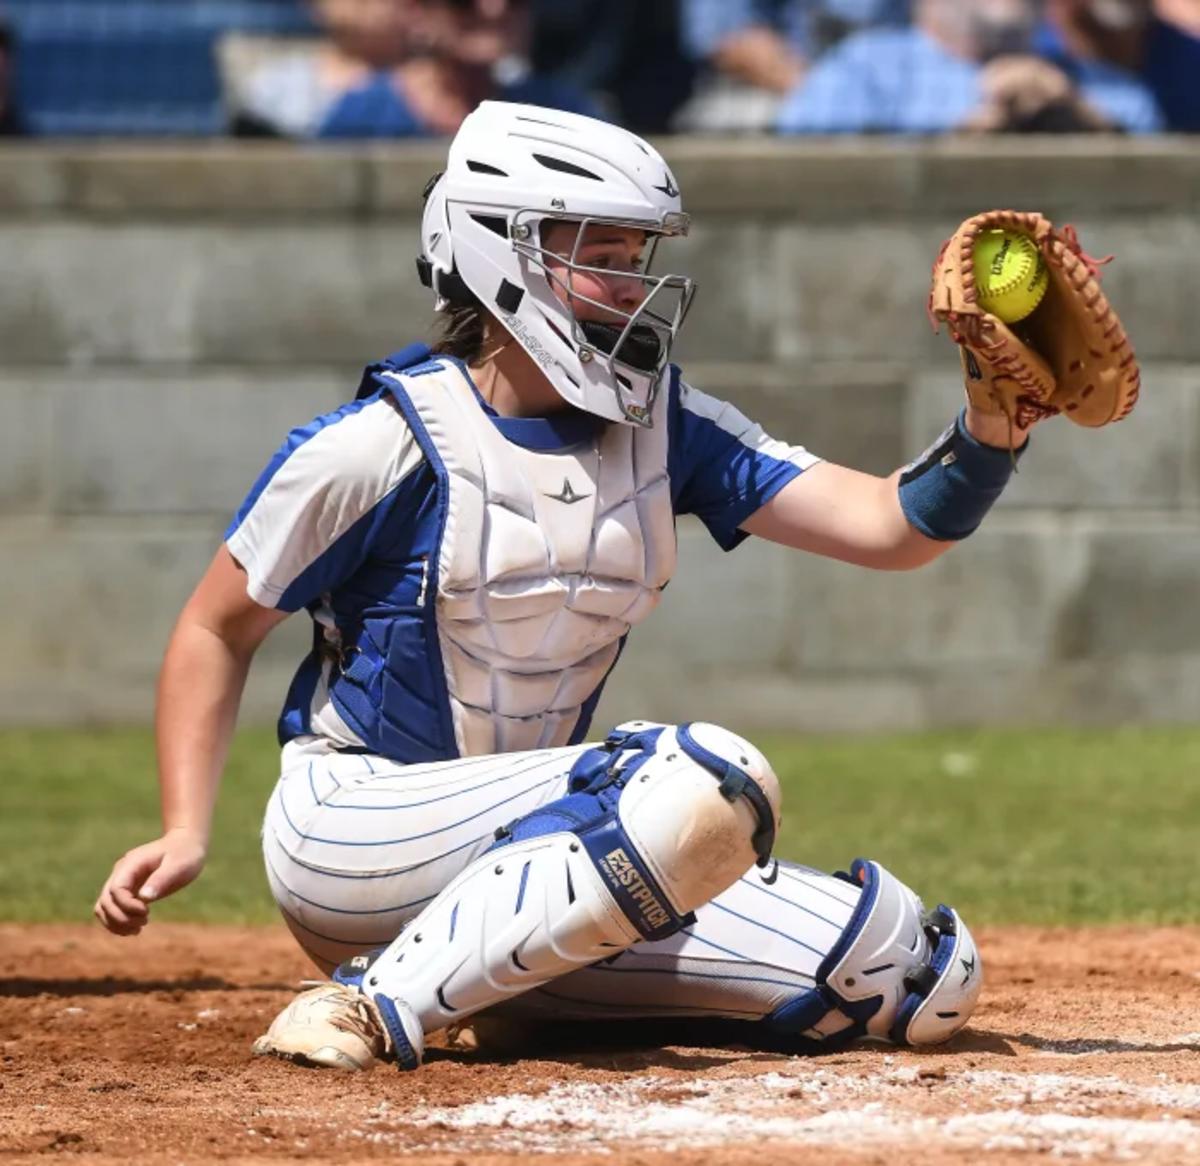 Abby Gentry catching during Bryant's semifinal win against Bentonville in extra innings last May. (Photo by Jimmy Jones)